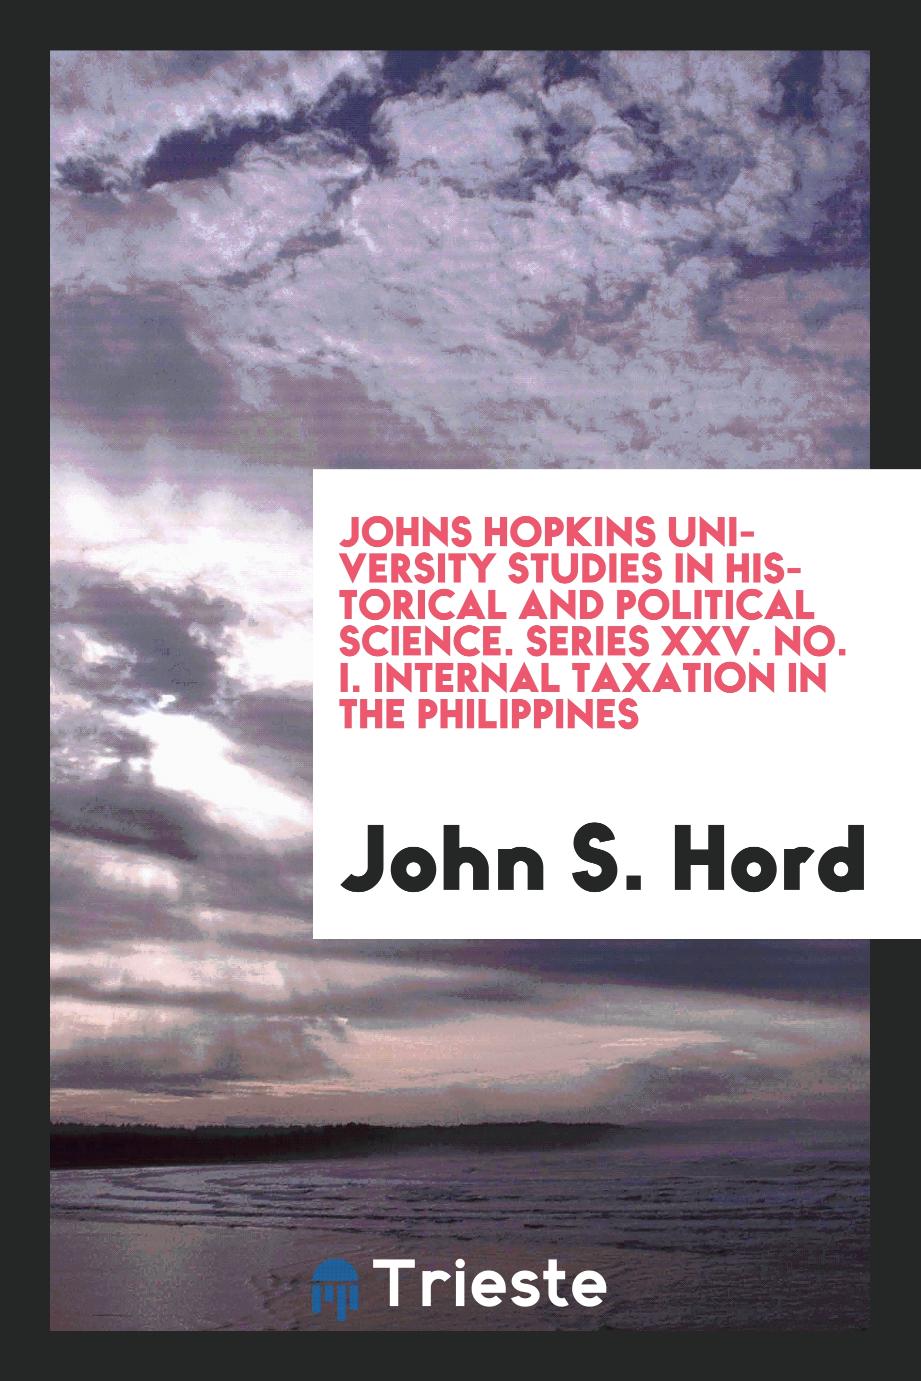 Johns Hopkins University Studies in Historical and Political Science. Series XXV. No. I. Internal Taxation in the Philippines